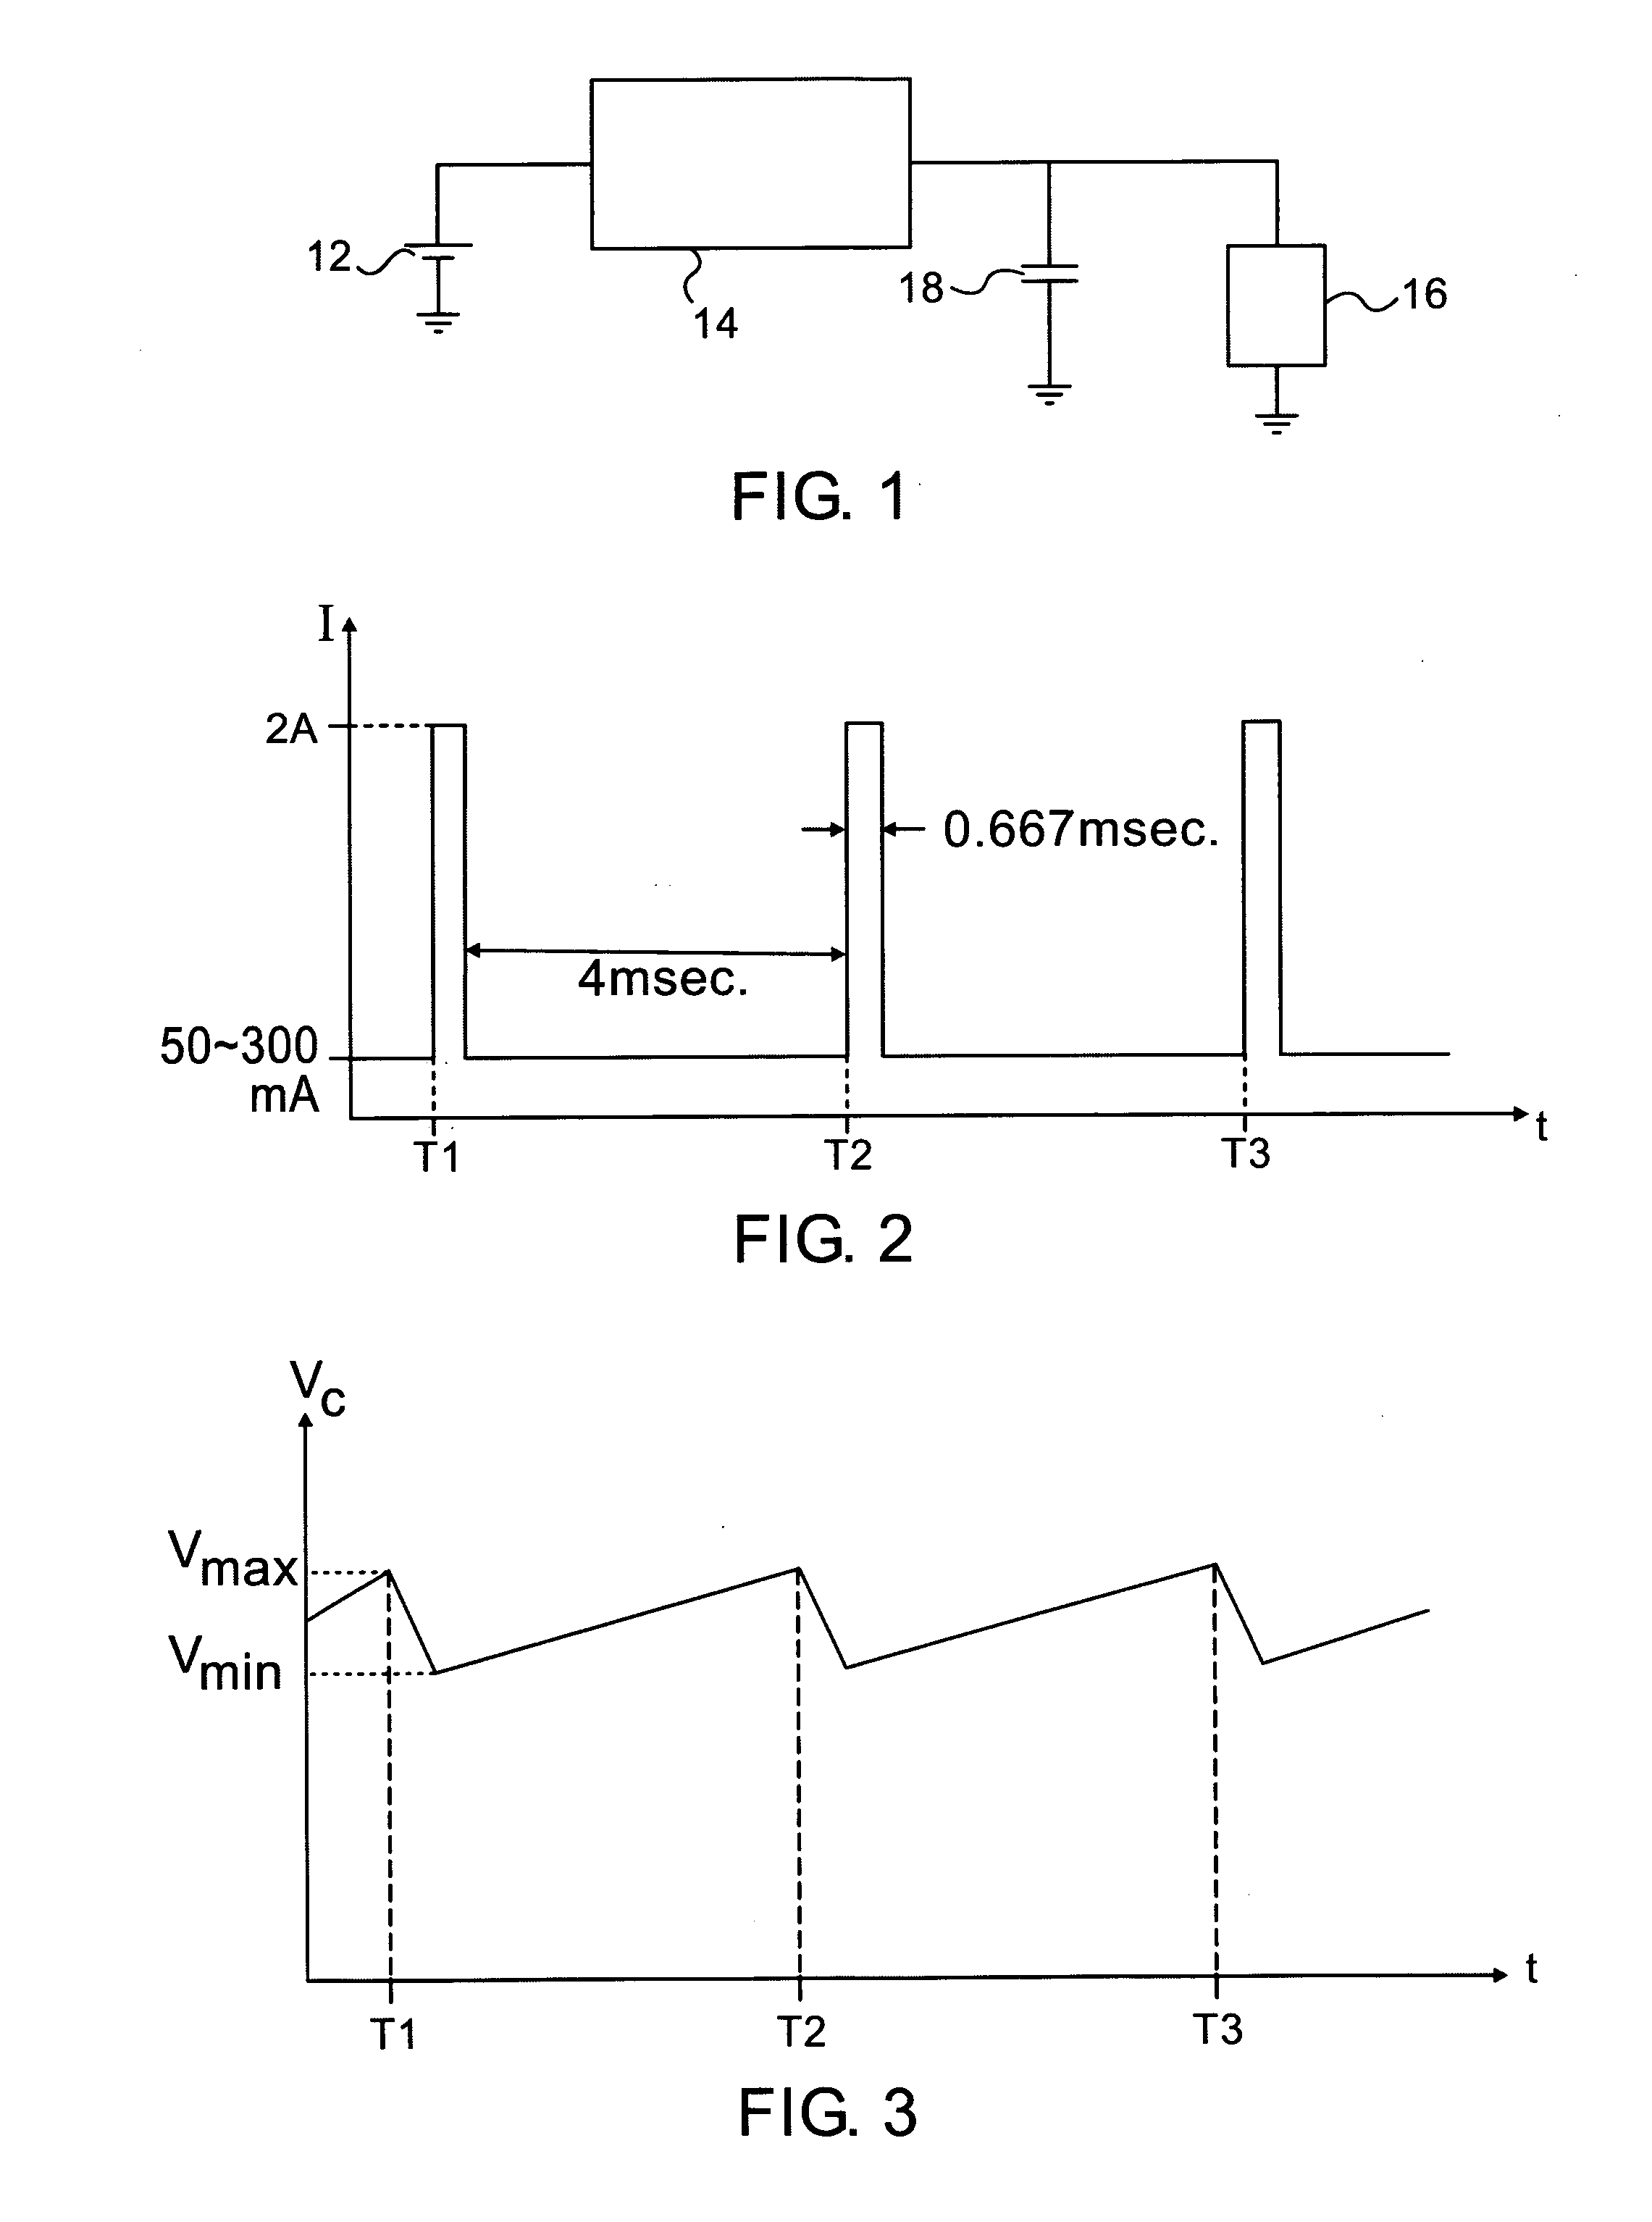 Capacitor powered mobile electronic device